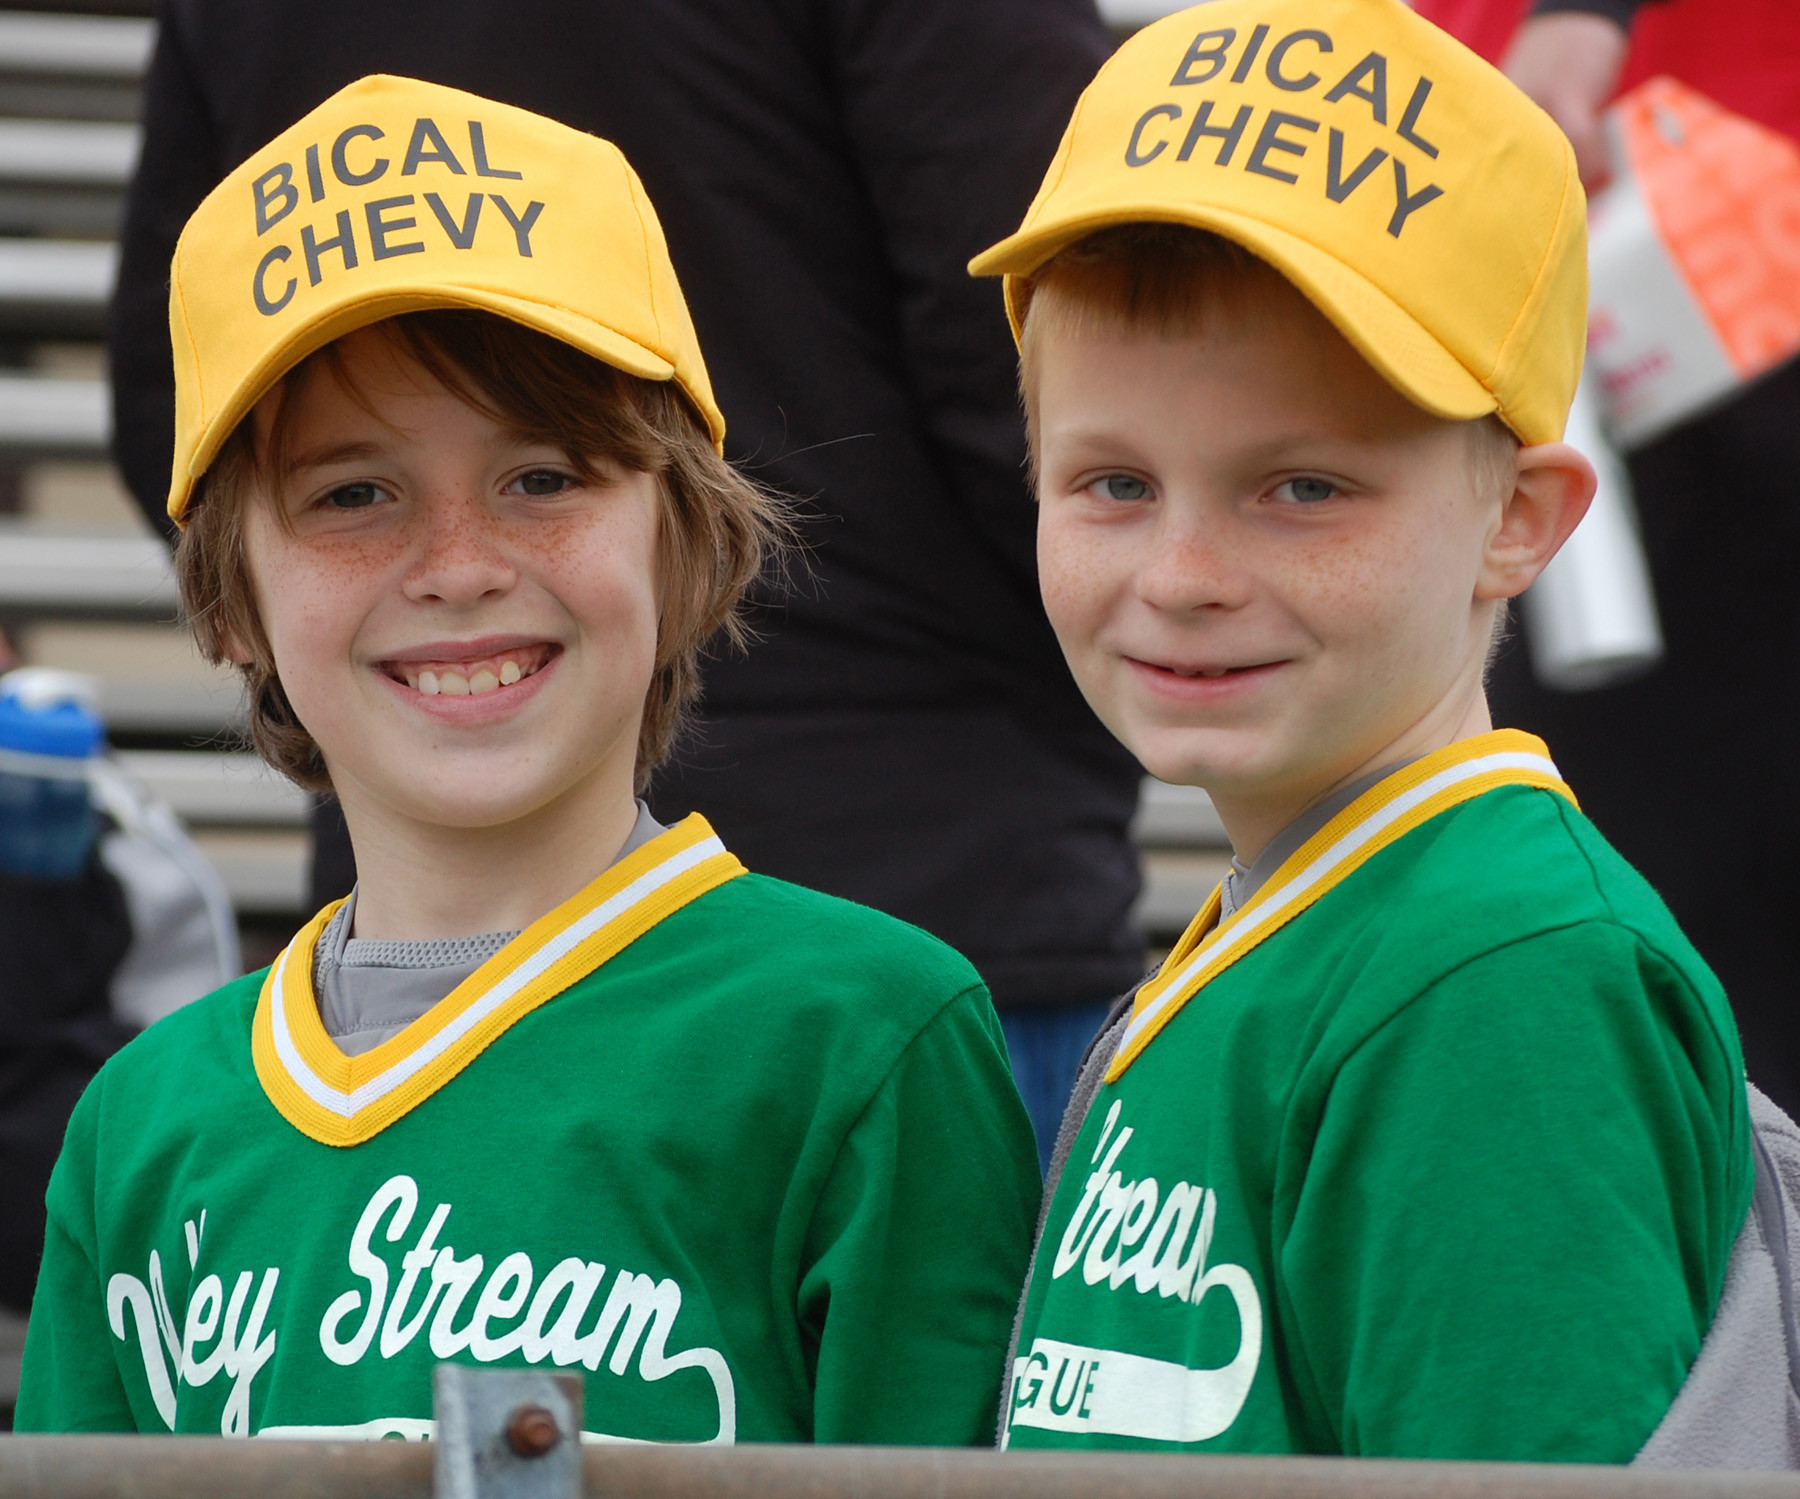 Jake Cresser, and Kyle Johnston, both 9, were excited for the start of baseball season.